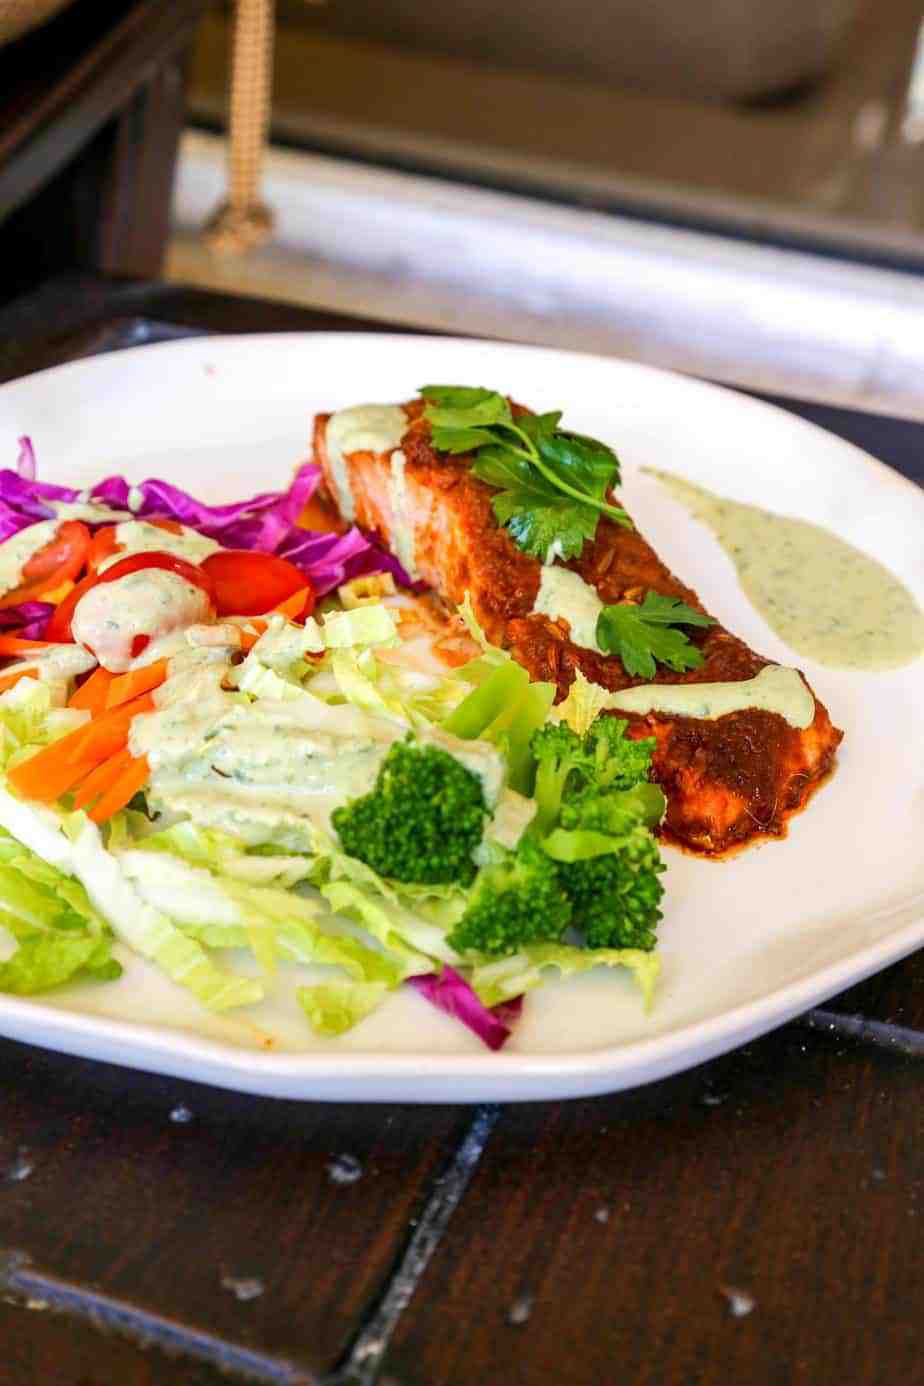 Oven baked salmon with Peruvian Spices on a plate with a rainbow salad.